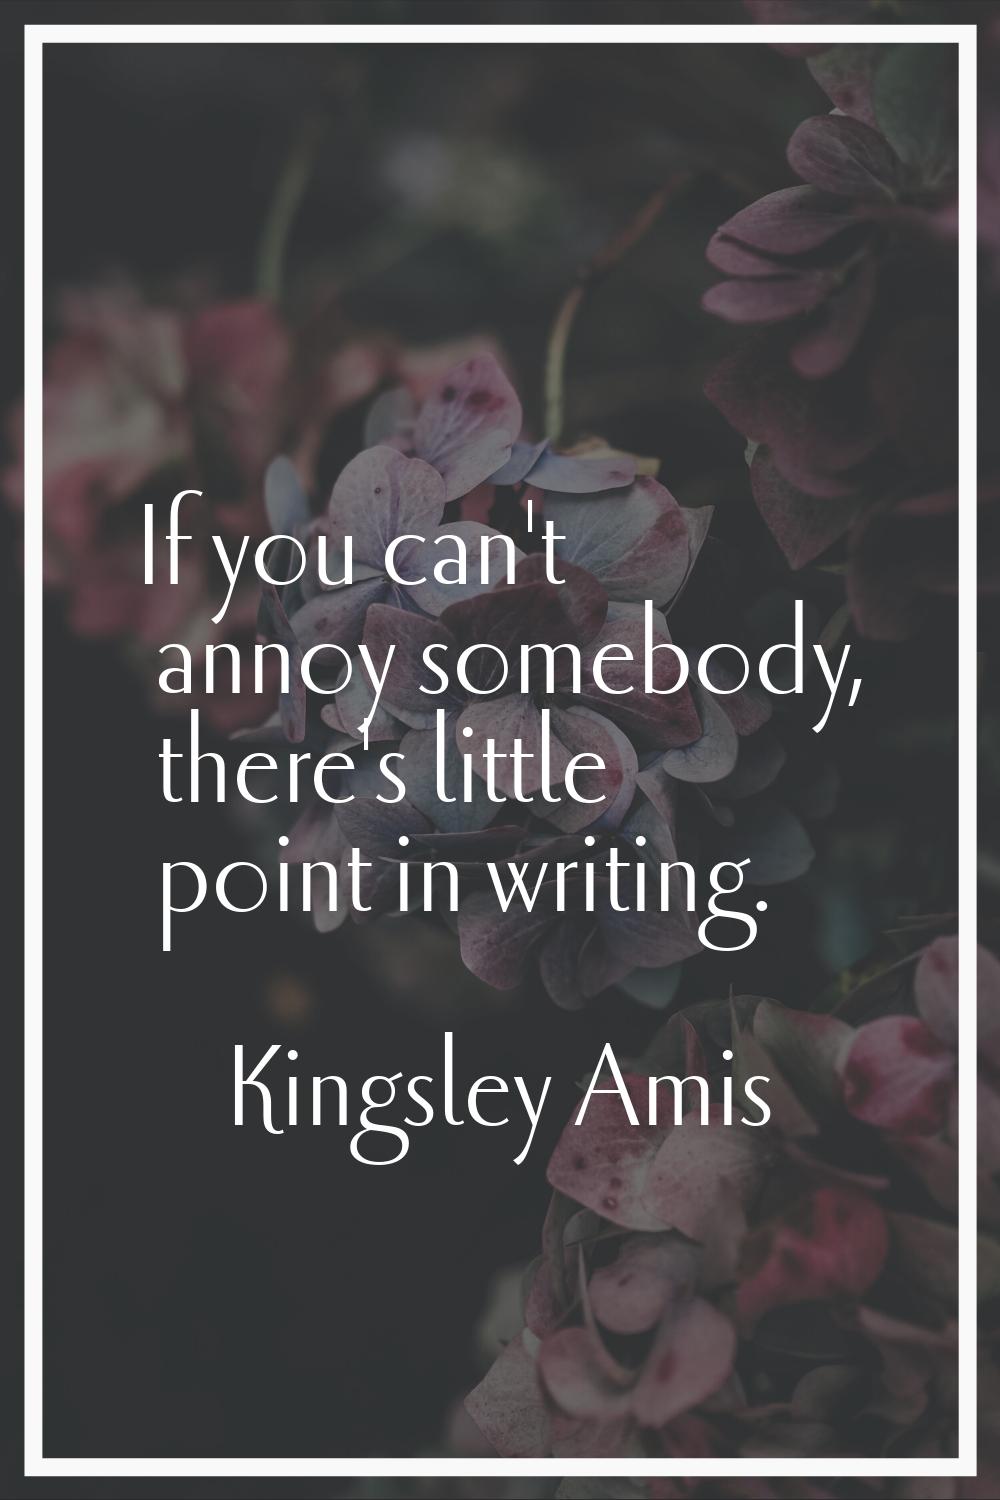 If you can't annoy somebody, there's little point in writing.